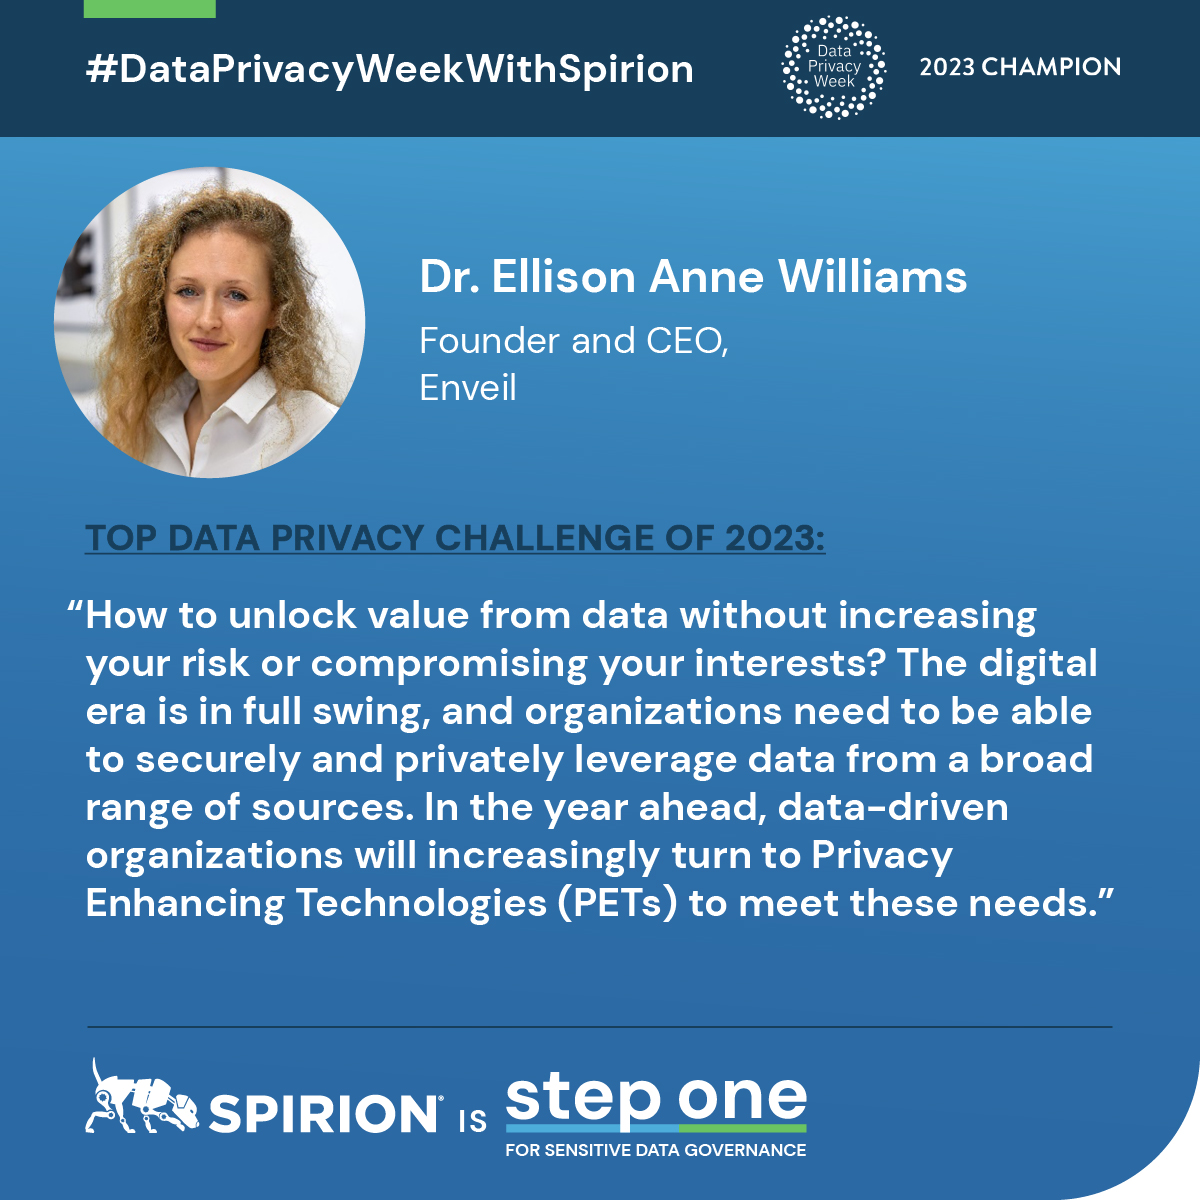 Happy #DataPrivacyWeek! Thanks to @Spirion for including us in this series. 

Learn more about #PrivacyEnhancingTechnologies here: https://t.co/XFEOof0aDQ 